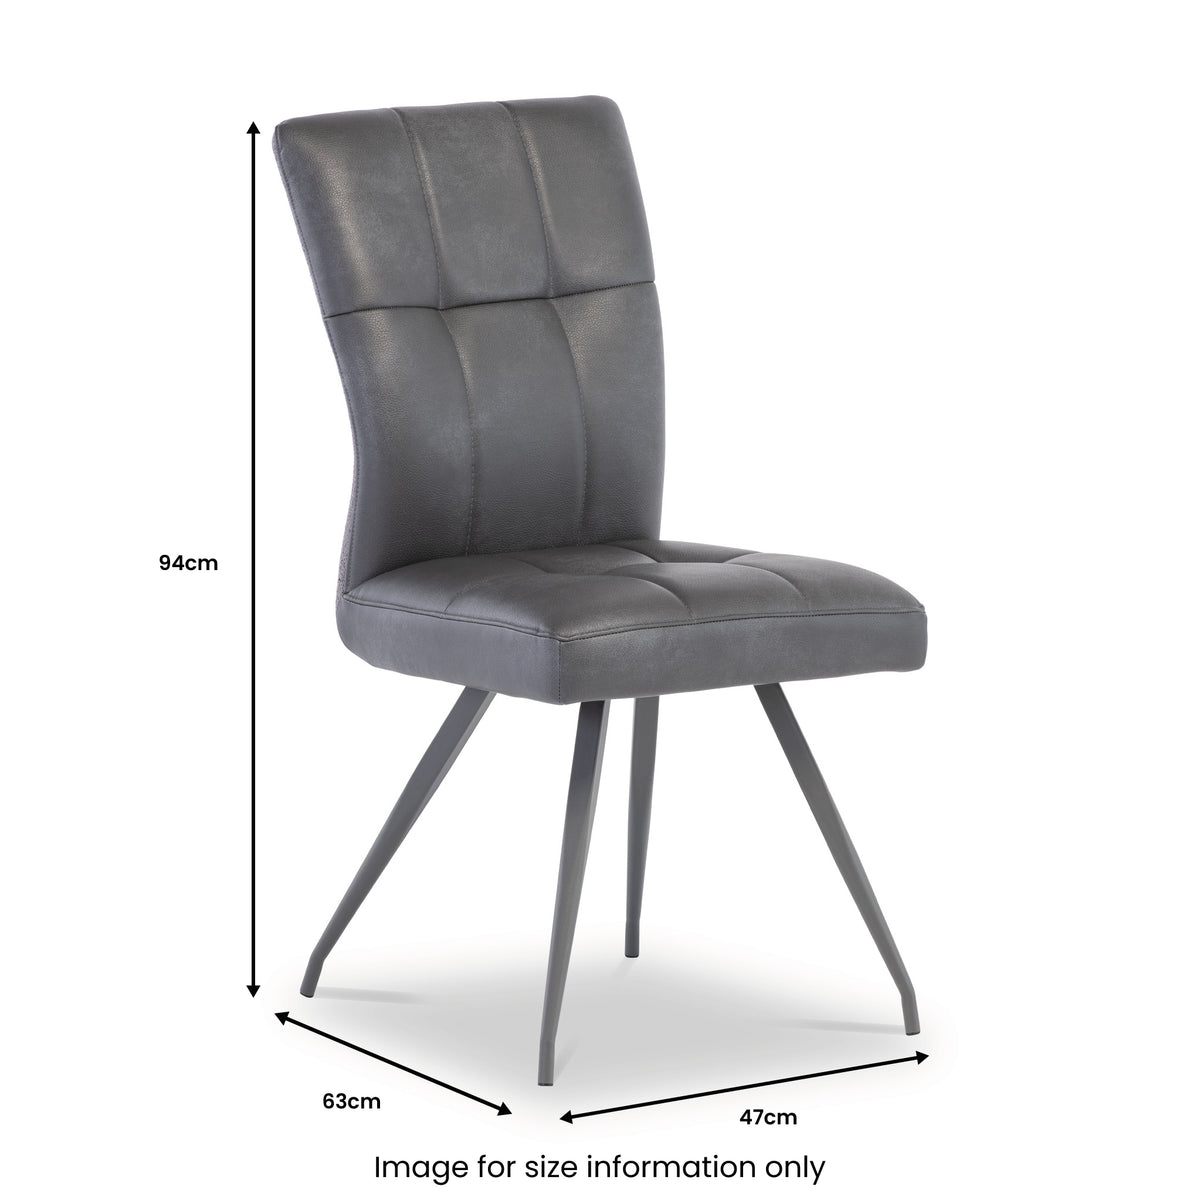 Kourt Grey Faux Leather Dining Chair by Roseland Furniture